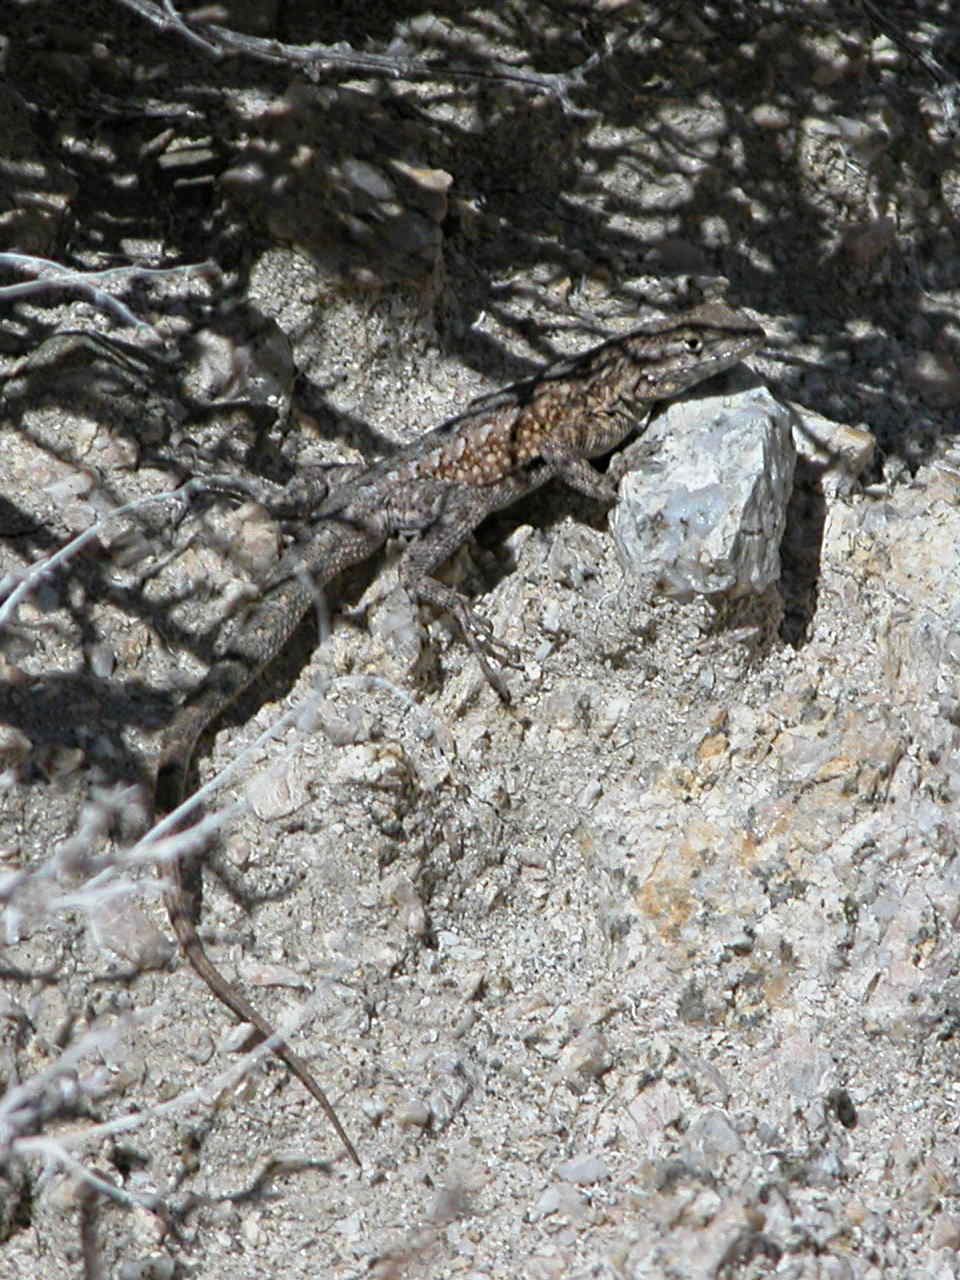 Common Side-Blotched Lizard